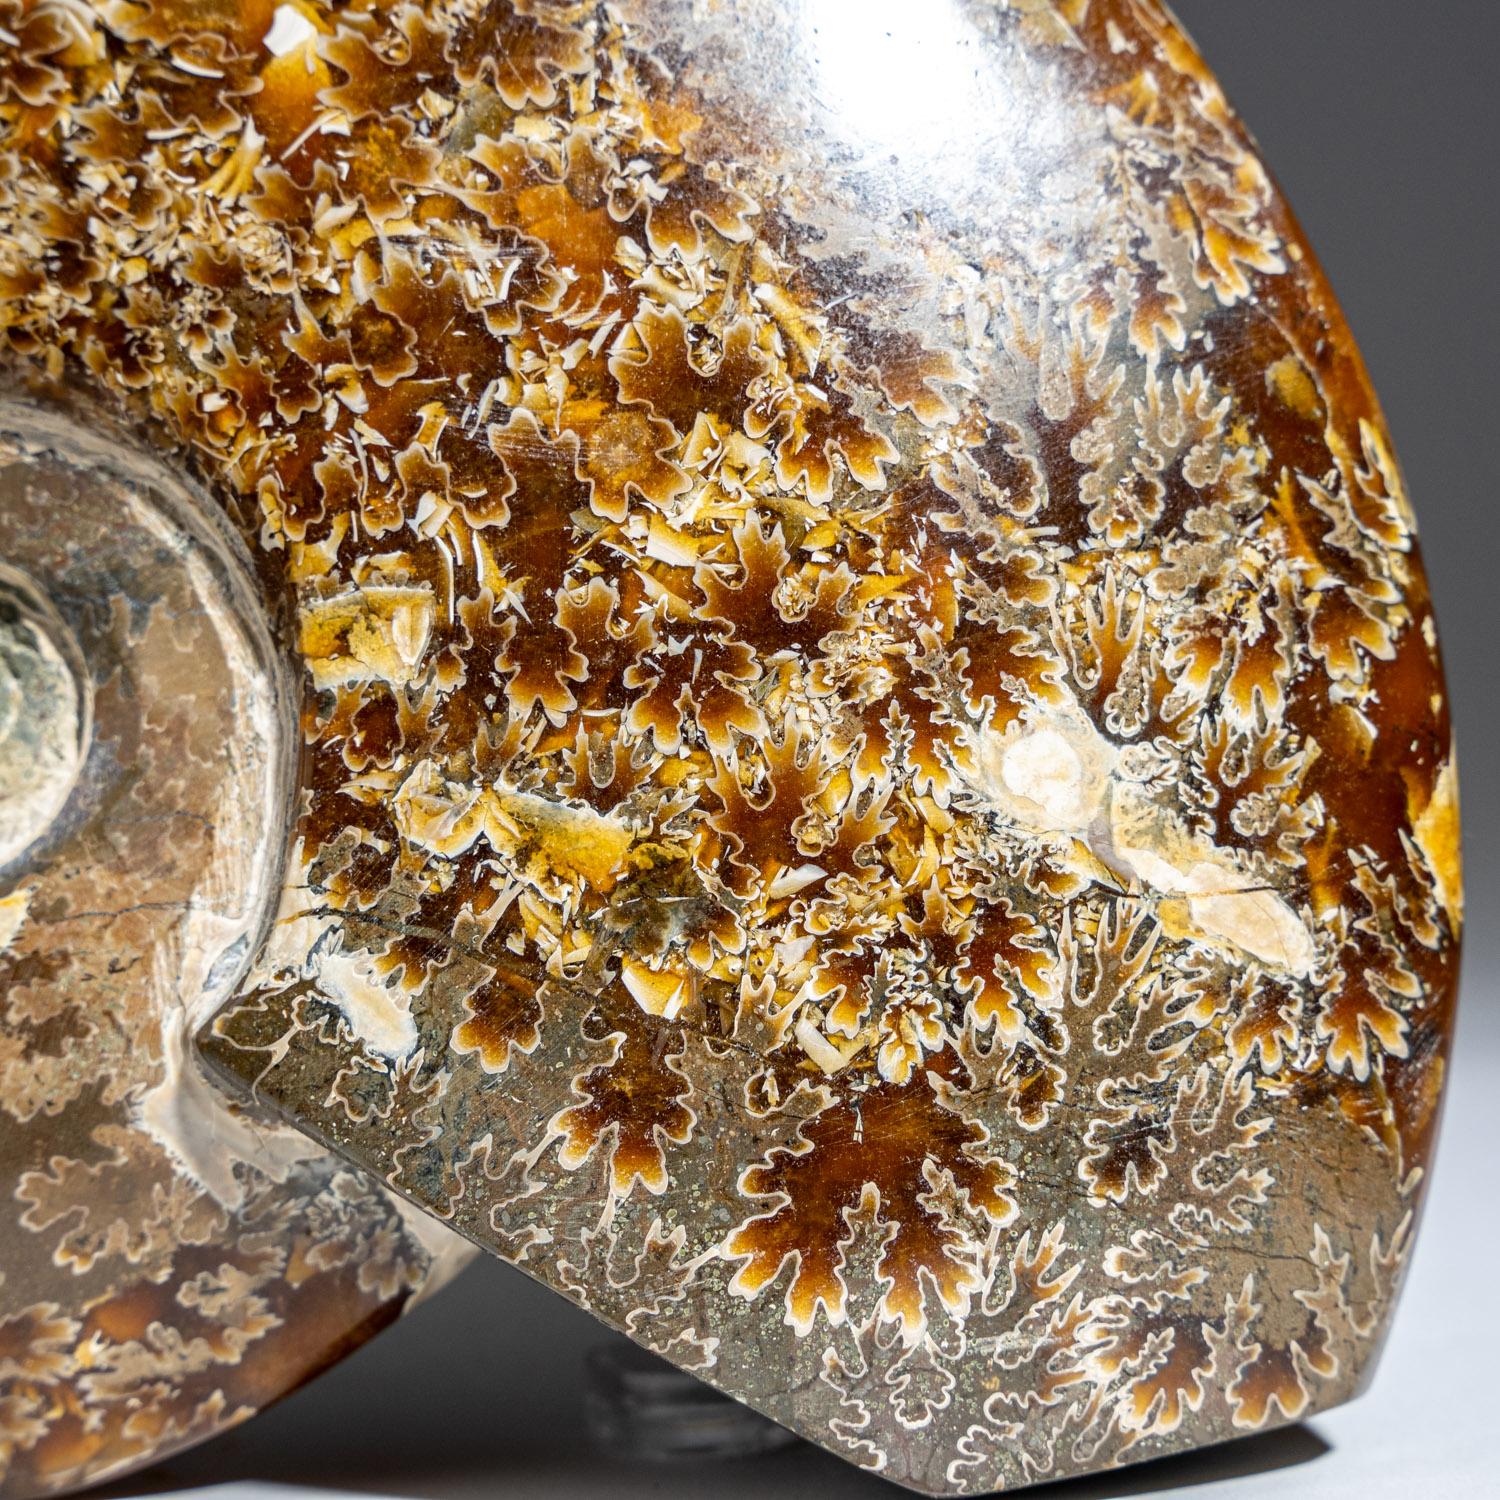 Museum-quality, fossilized and calcified ammonite shell with an iridescent, opalized shimmer displaying hints of vibrant red. The fossilized shells of Ammonites are typically spiral-shaped, very much like that of the Nautilus. However, around 170